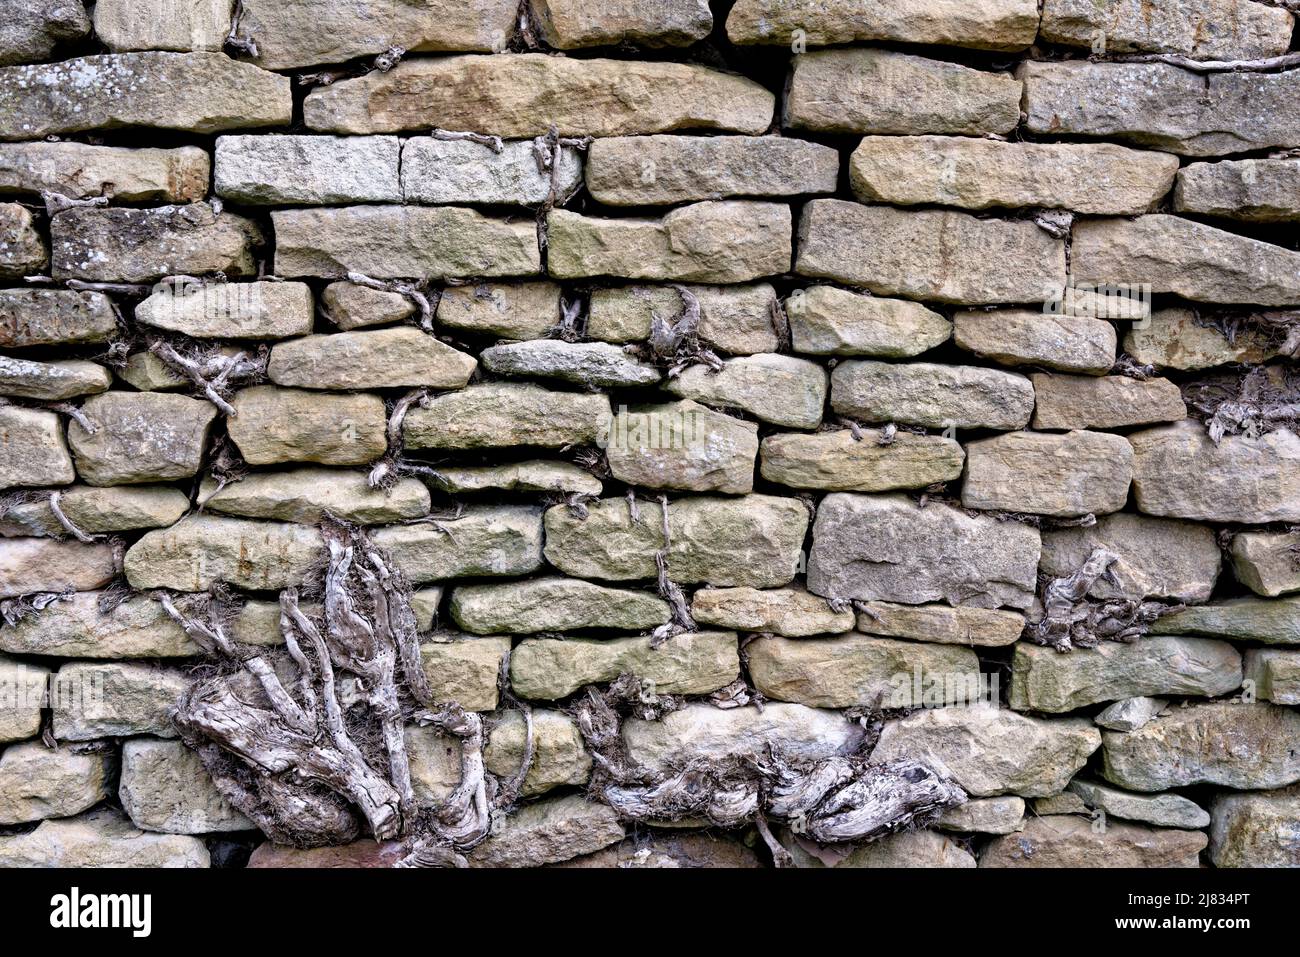 Background - A dry stone wall built with Cotswold stone at Burford in the Cotswolds, Gloucestershire, United Kingdom Stock Photo